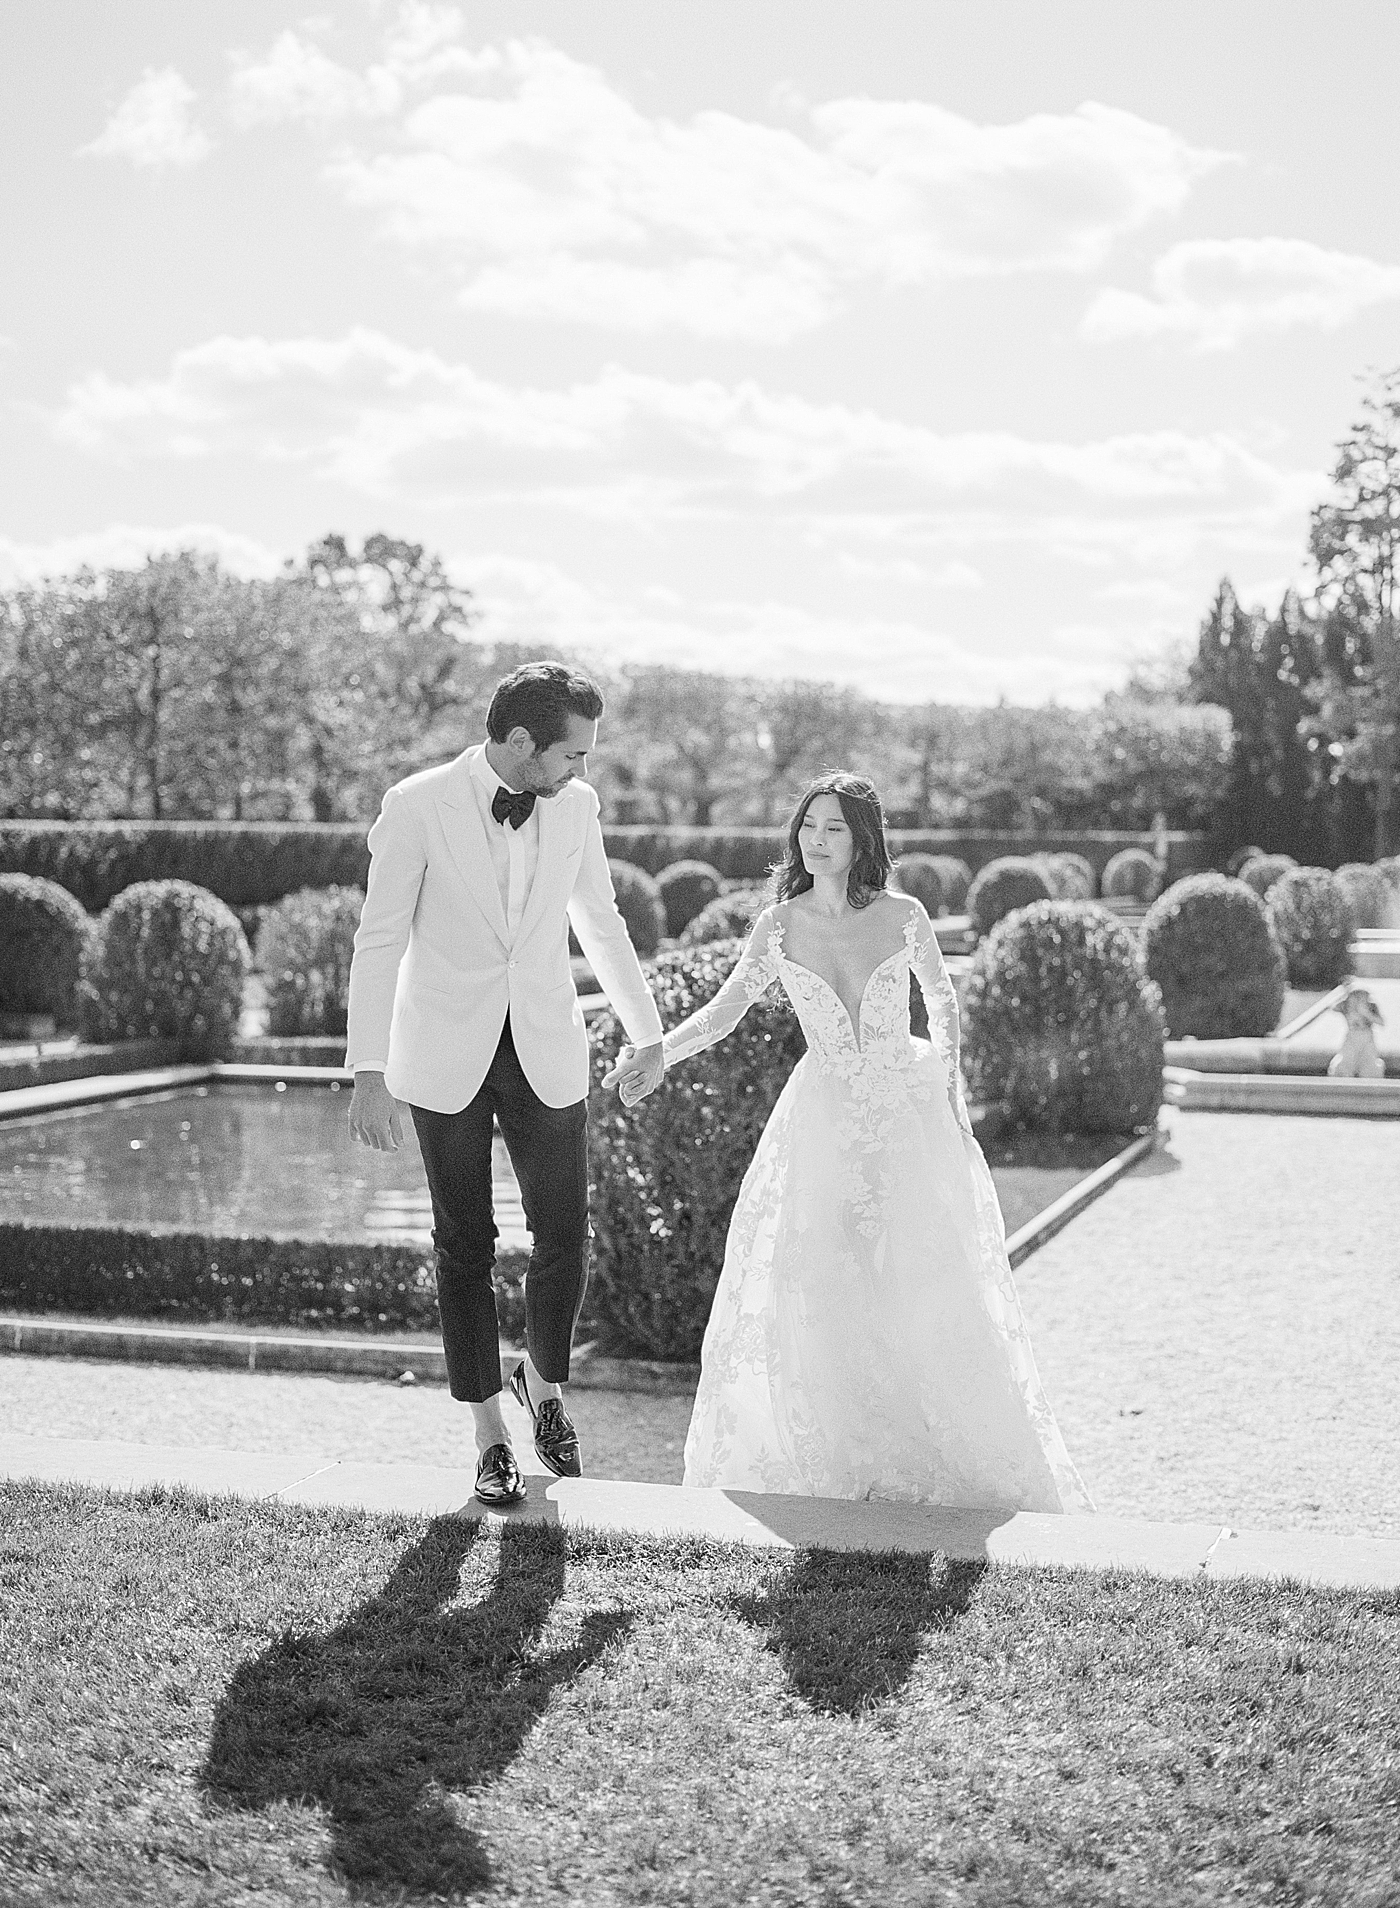 Black and white image of a bride and groom walking in a European garden | Image by Hope Helmuth Photography